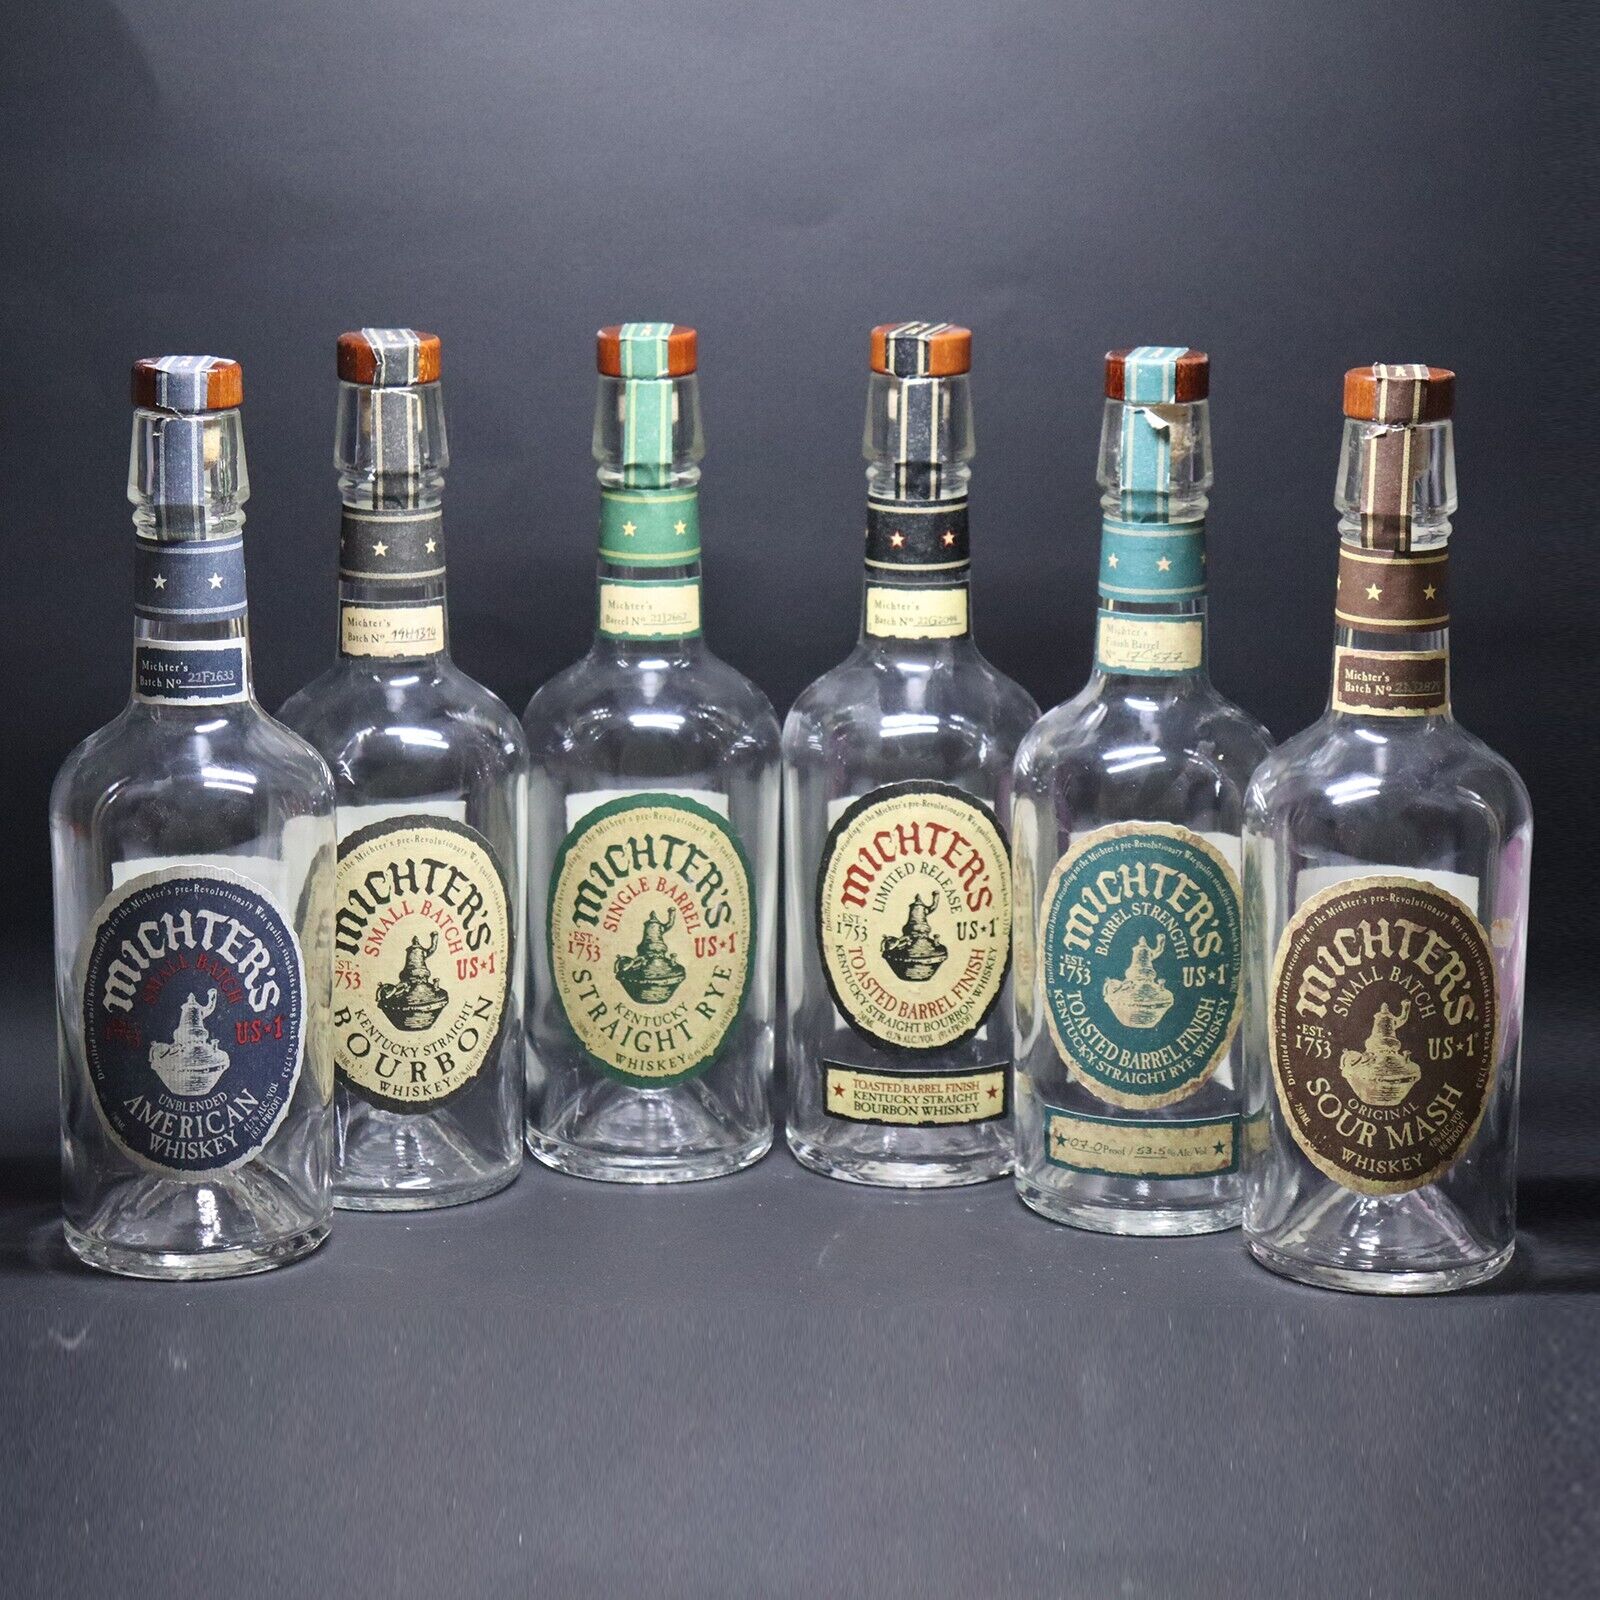 Michter’s Toasted Whiskey, Rye, Bourbon and Sour Mash Bottles Lot of 6 - Empty